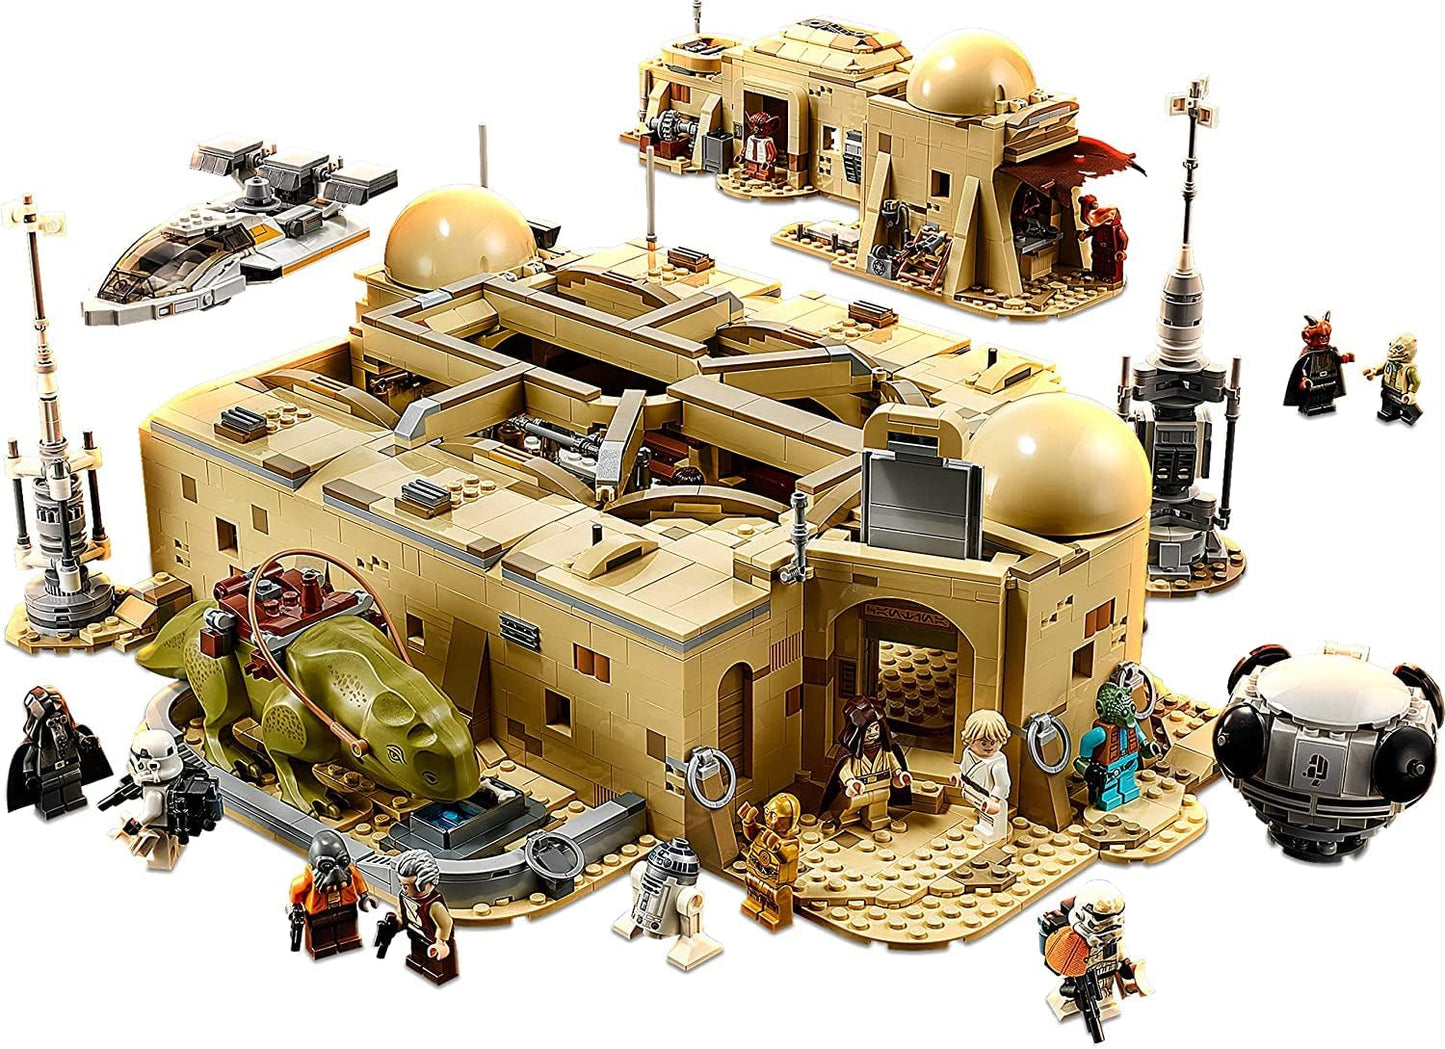 LEGO Star Wars Mos Eisley Cantina Construction Toy, Ages 16+, 3187 Pieces